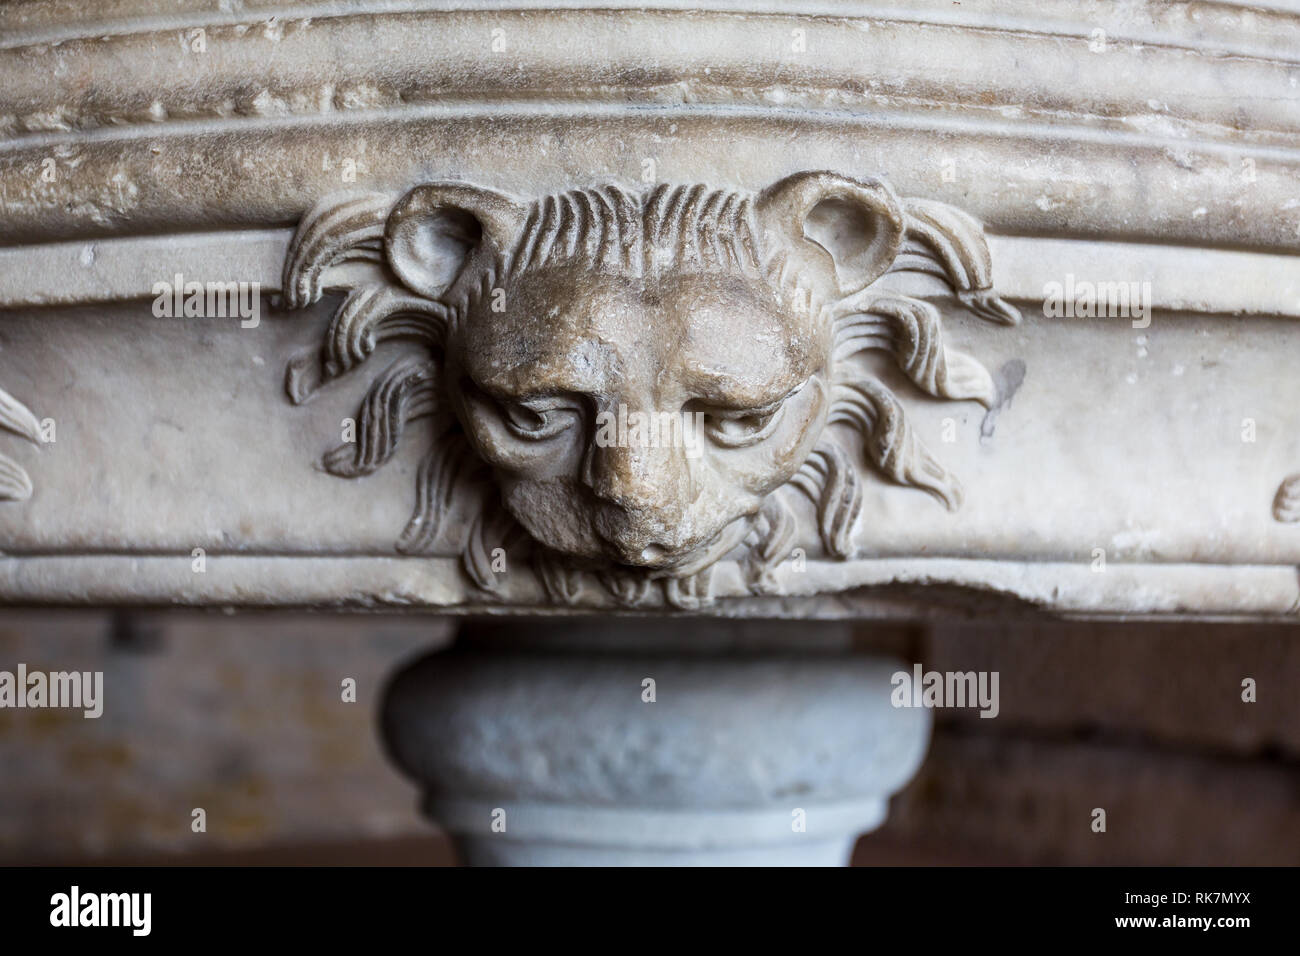 Medieval lions head carved out of stone at base of large stone bowl in Castle at Carcassonne, France on 11 June 2015 Stock Photo